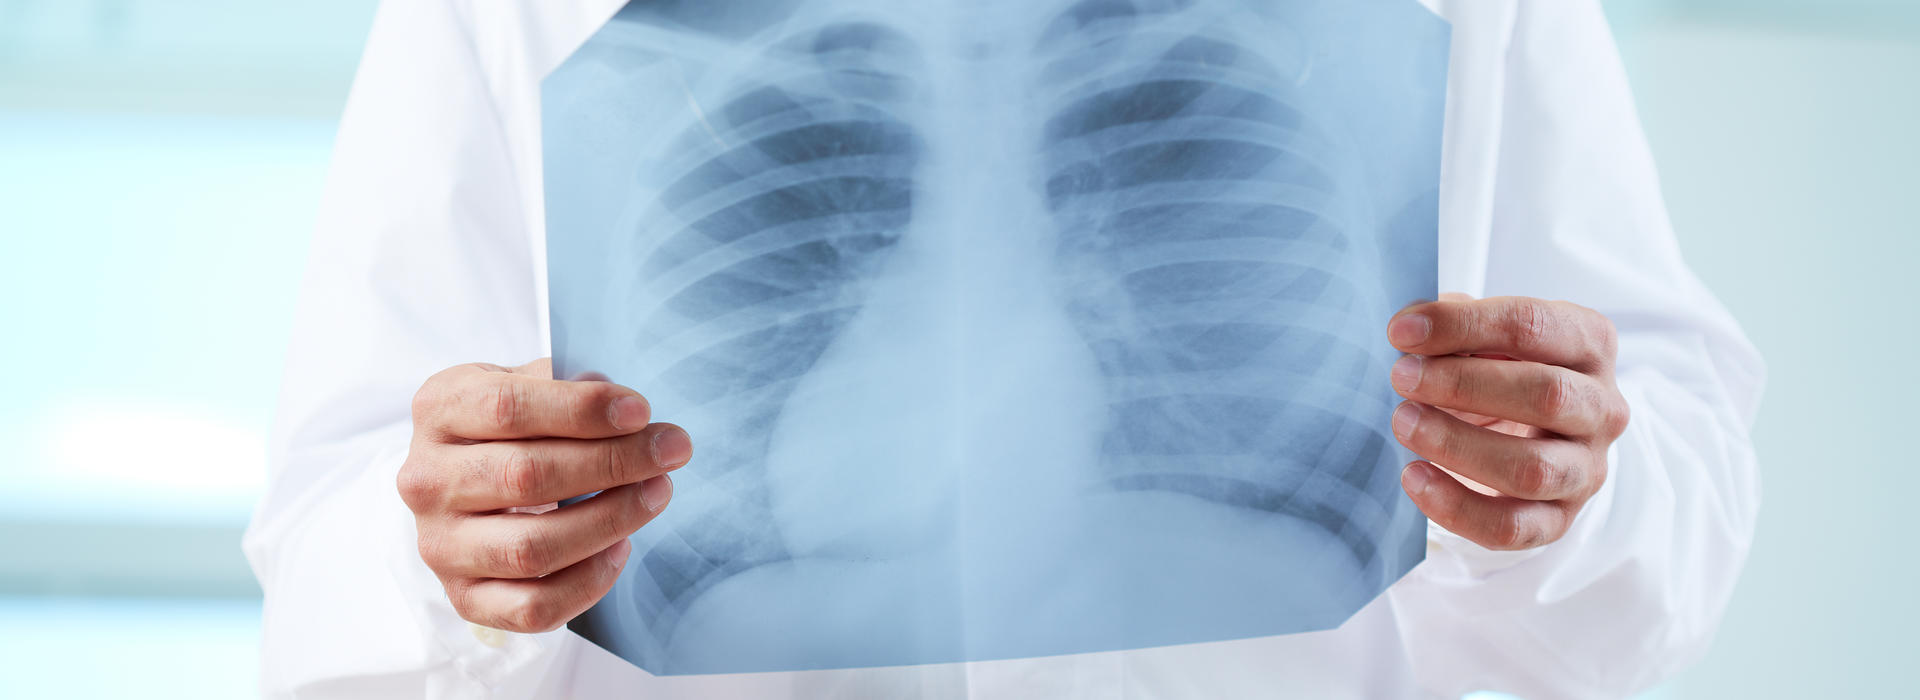 Doctor holding chest x-ray image over their ribcage